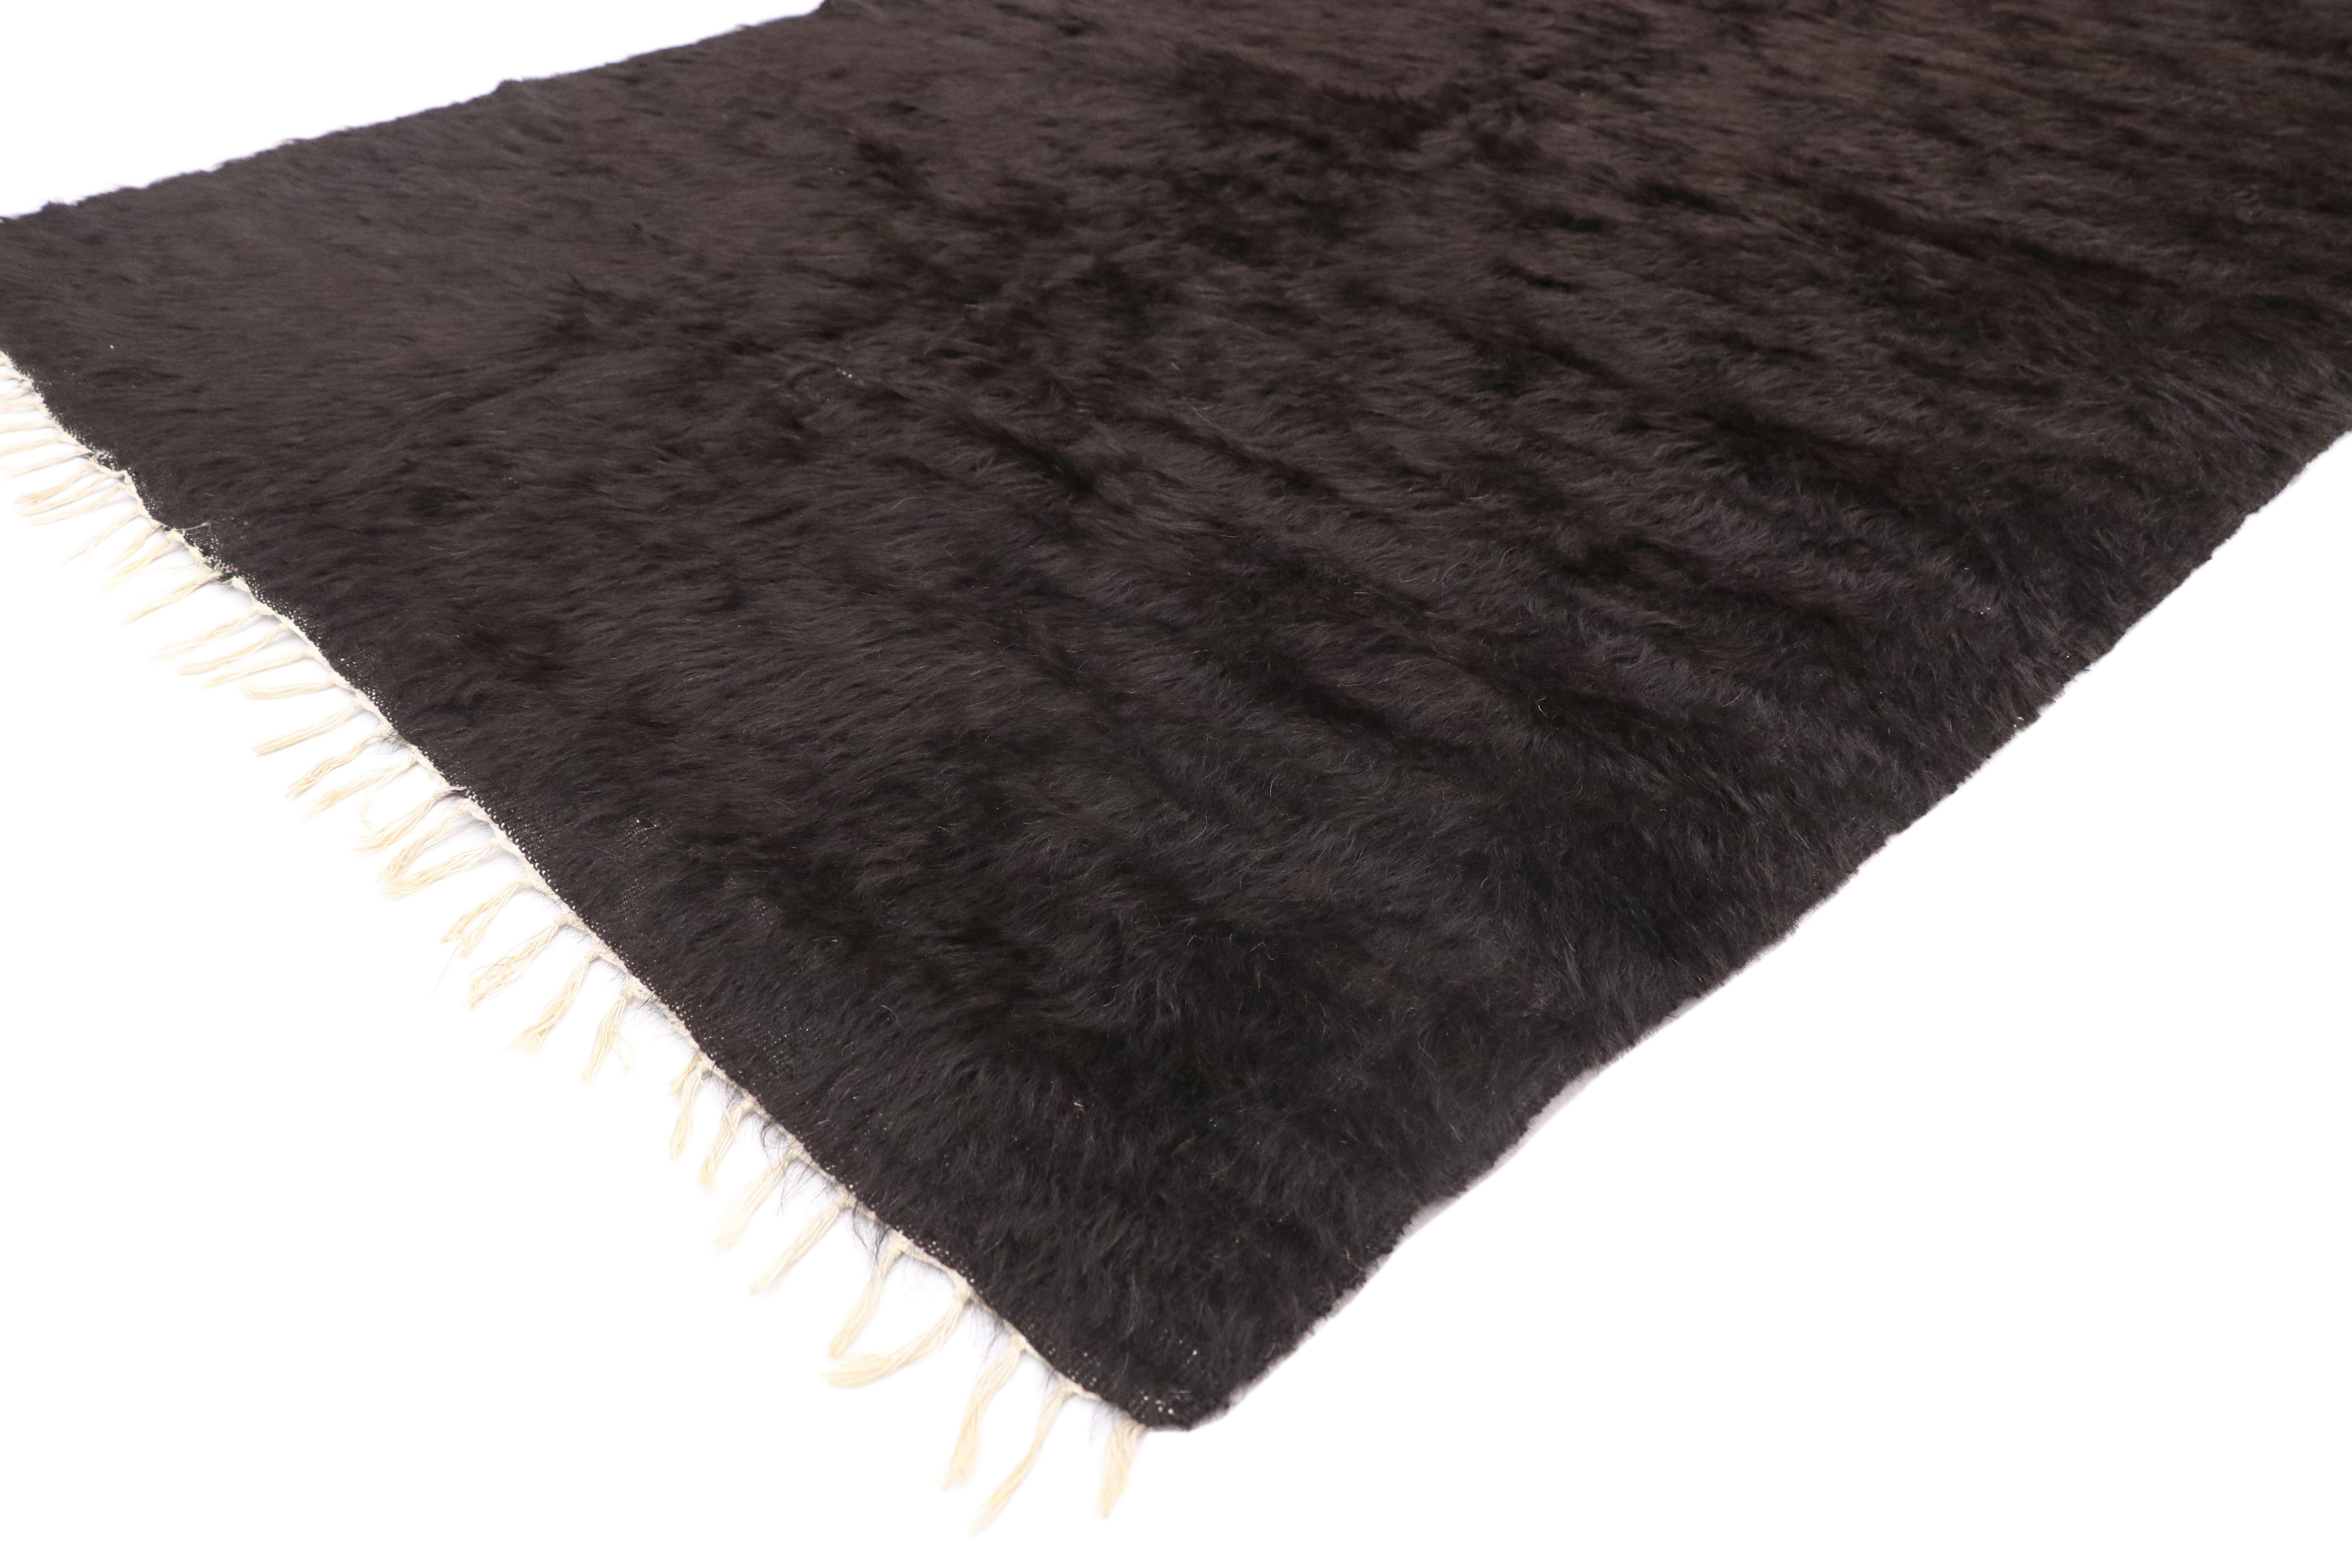 52838 vintage Turkish Angora Blanket rug with Mid-Century Modern. Warm and inviting combined with its plush texture, this hand knotted wool vintage Turkish angora blanket rug is a captivating vision of woven beauty waiting to inspire delightfully